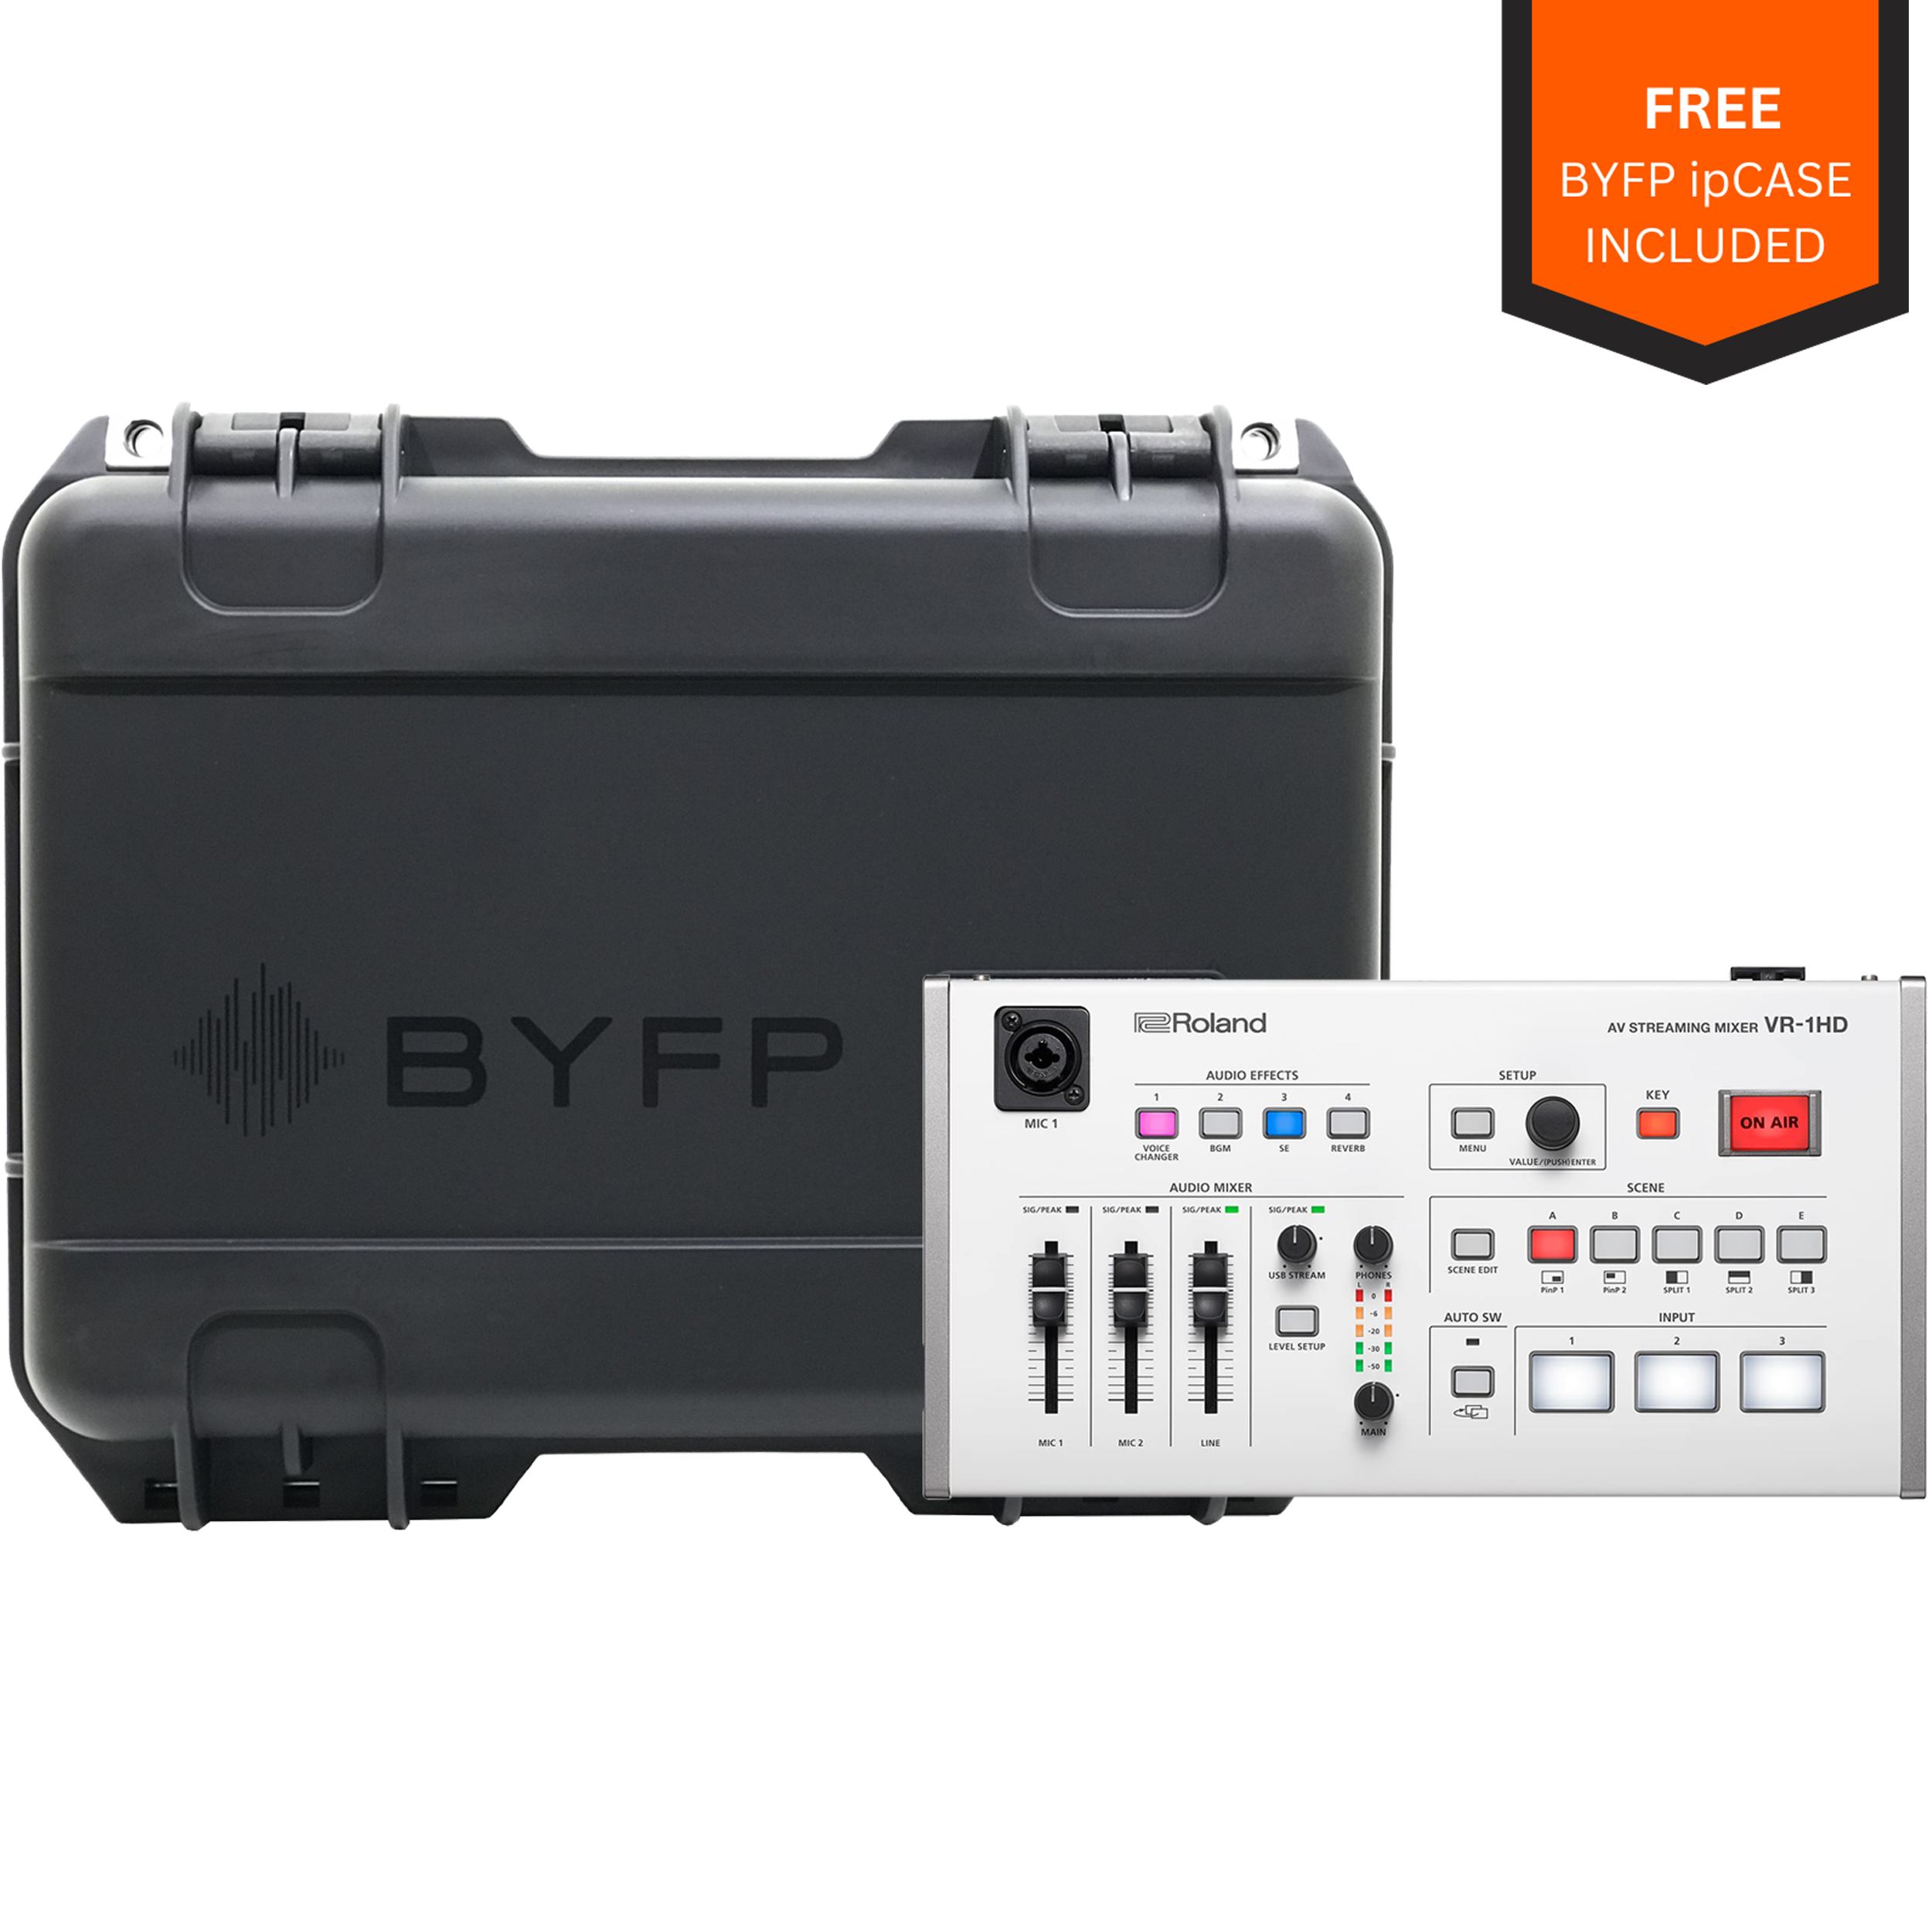 Roland VR-1HD Video Switcher tourPack with BYFP ipCase